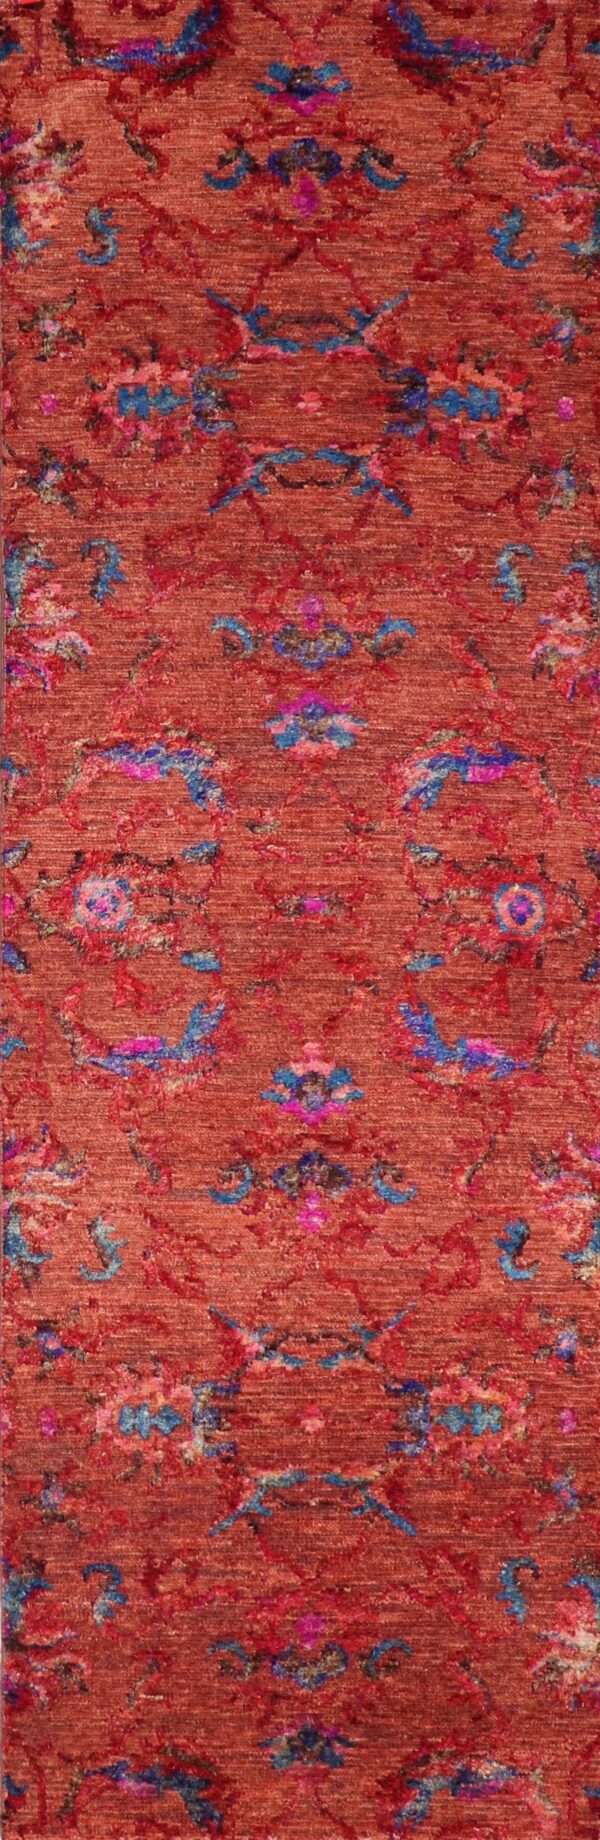 5’9”x8’ Transitional Orange Wool & Silk Hand-Knotted Rug - Direct Rug Import | Rugs in Chicago, Indiana,South Bend,Granger